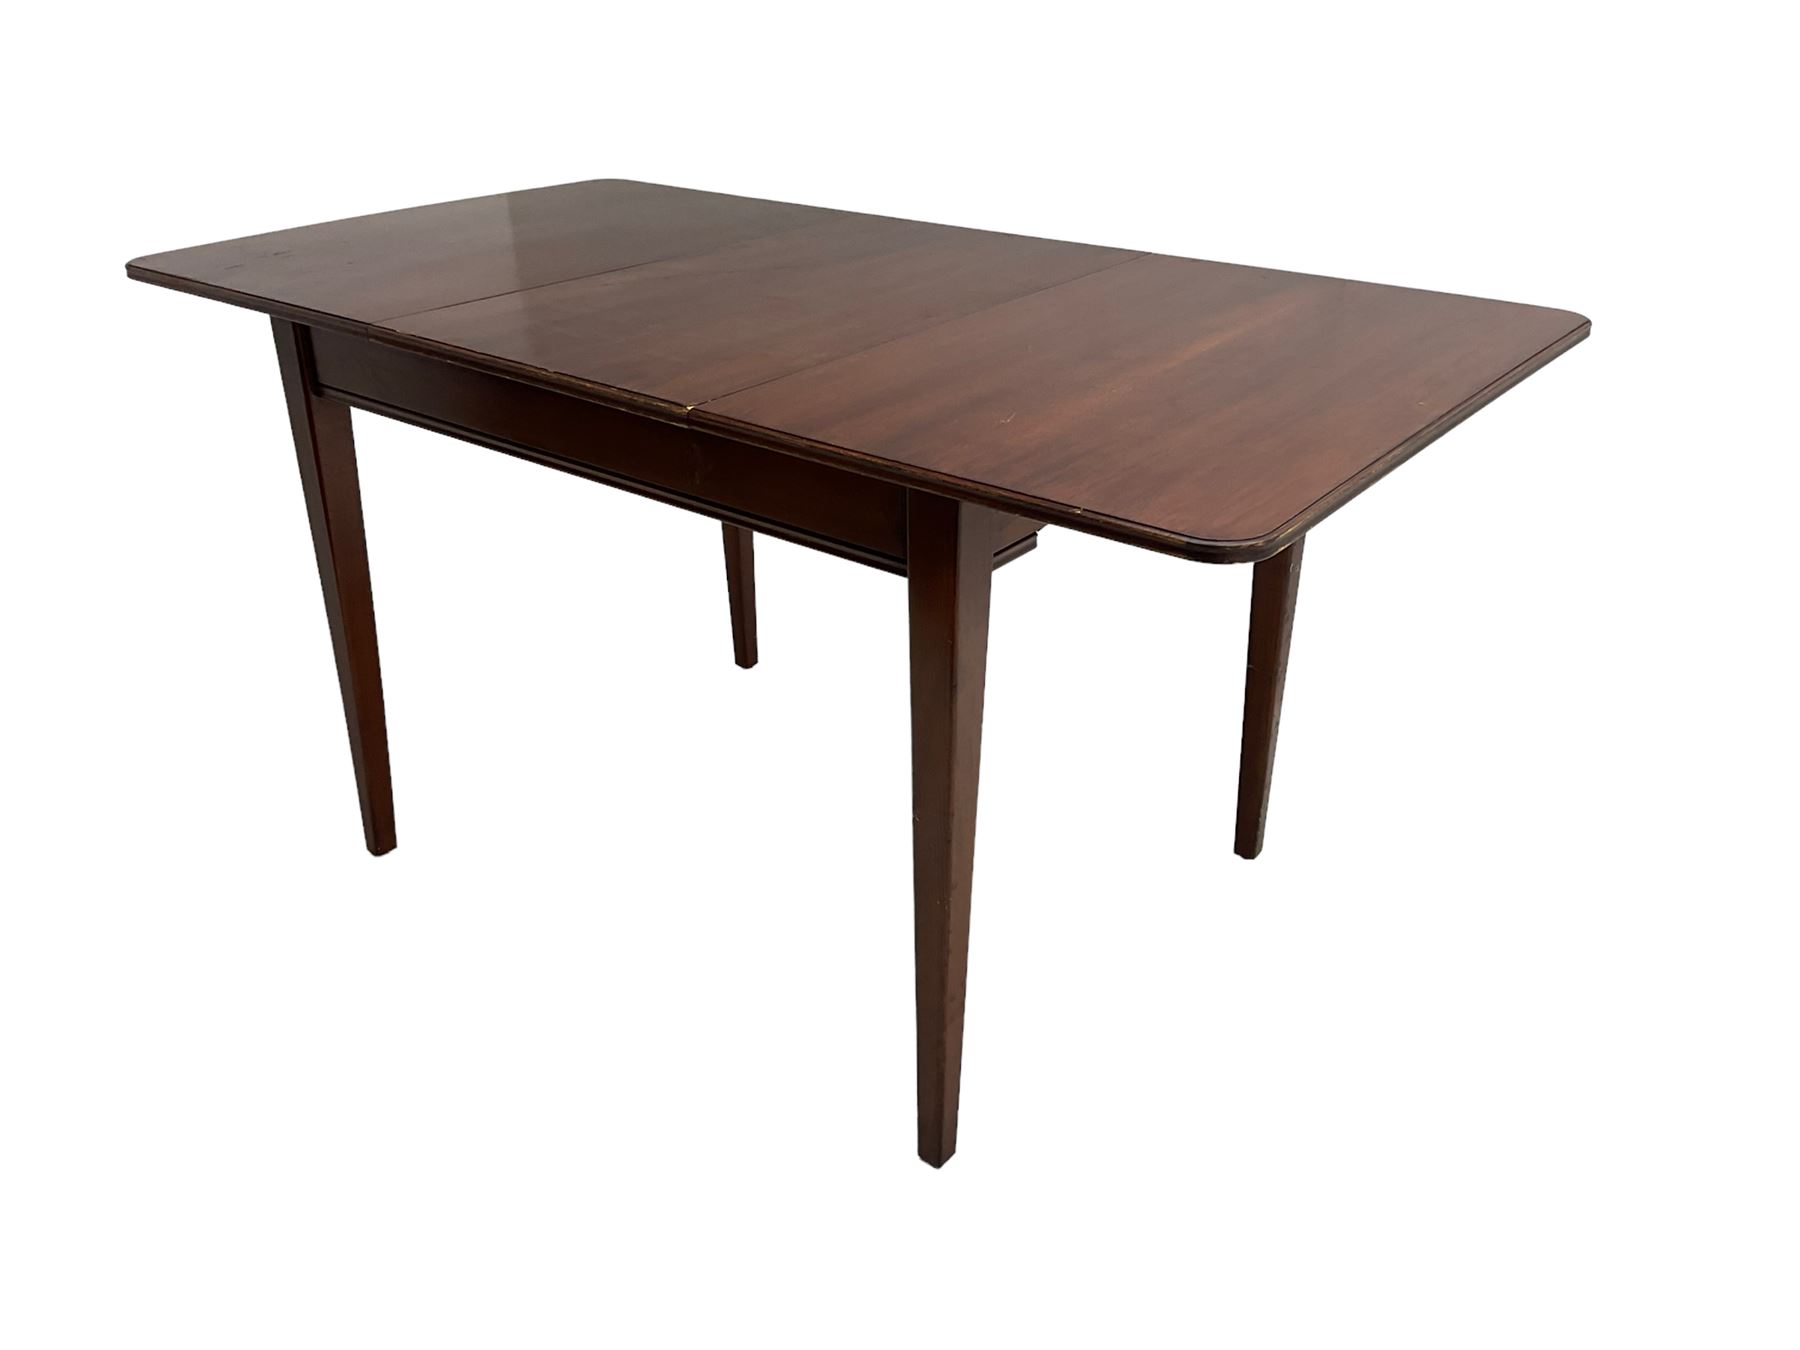 Russell of Broadway - mid-20th century teak extending dining table with square tapering supports - Image 2 of 2